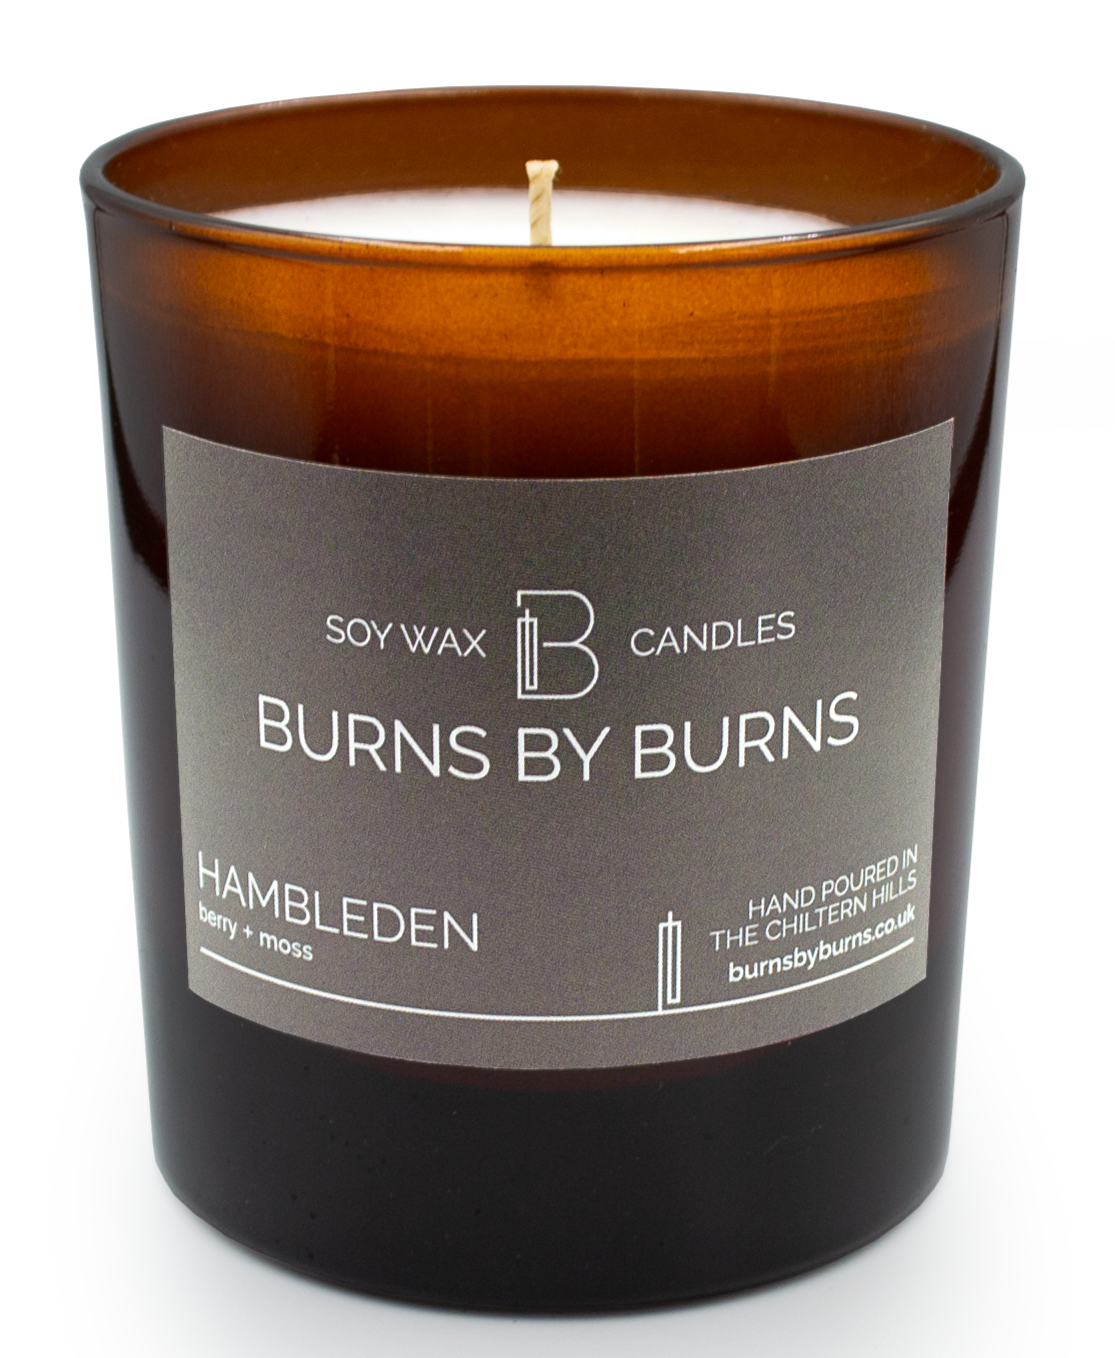 Hambleden berry and moss candle in amber jar